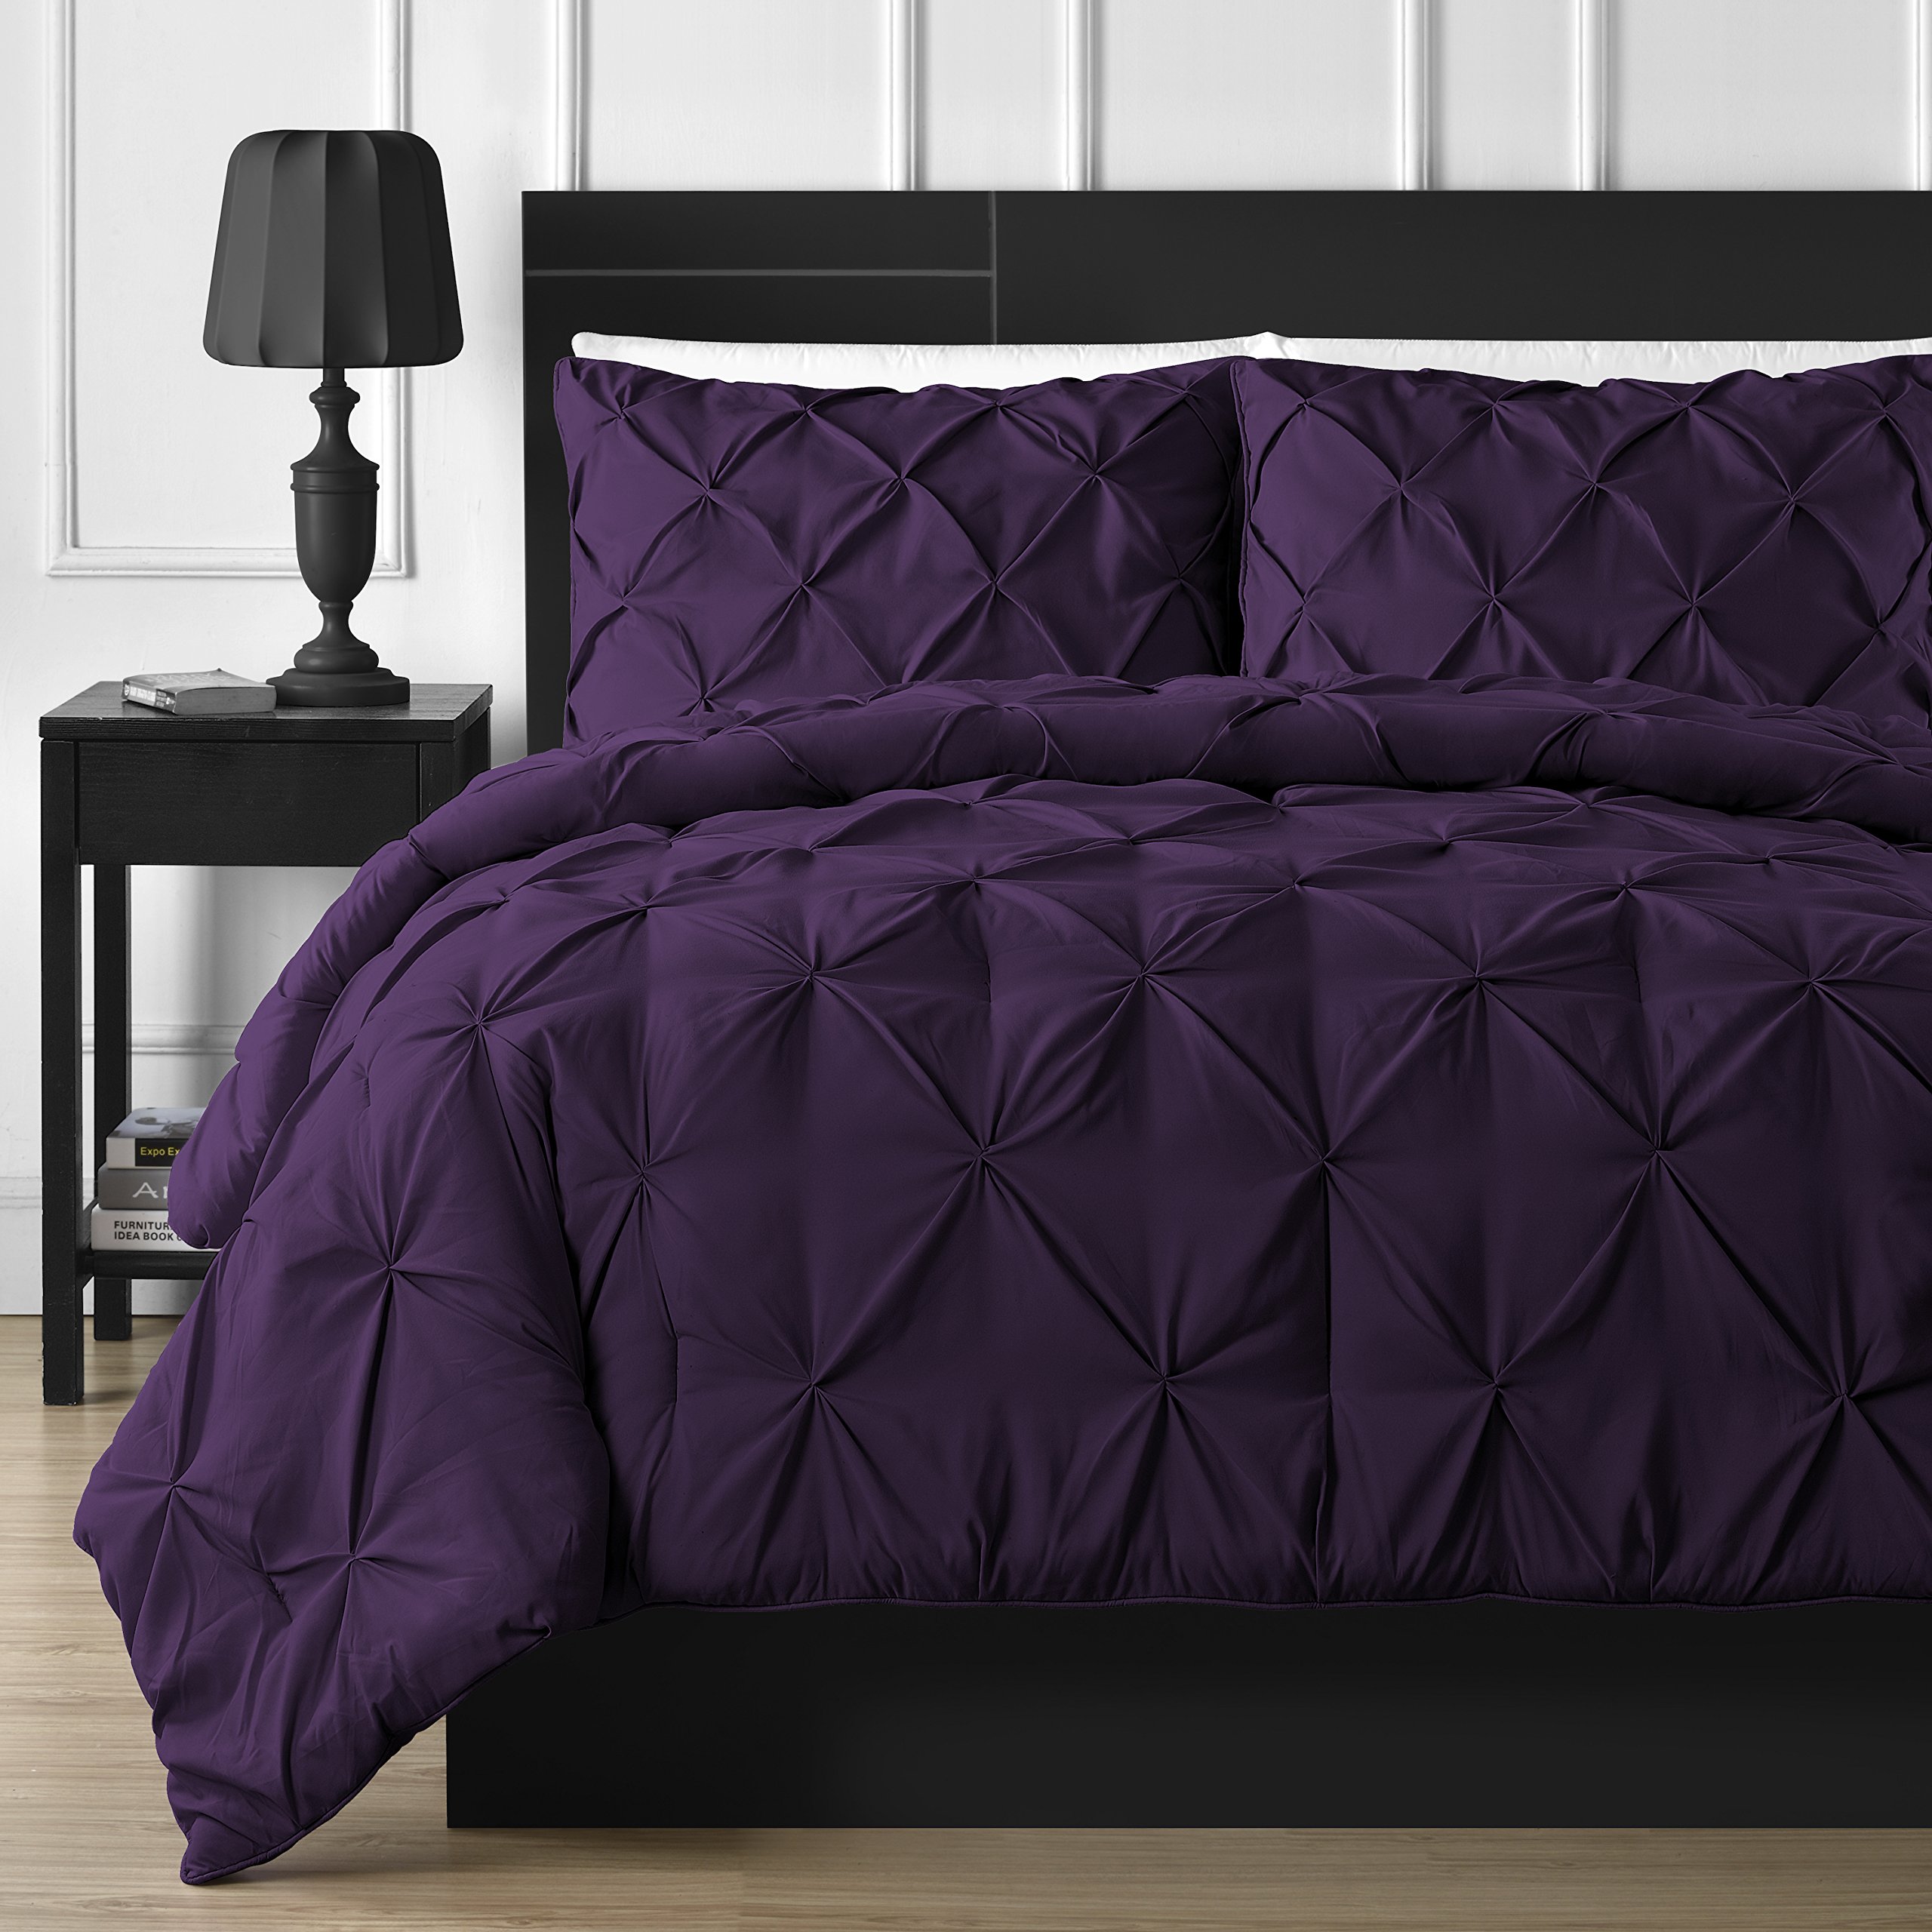 Book Cover Comfy Bedding Double Needle Durable Stitching 3-Piece Pinch Pleat Comforter Set All Season Pintuck Style, King, Plum